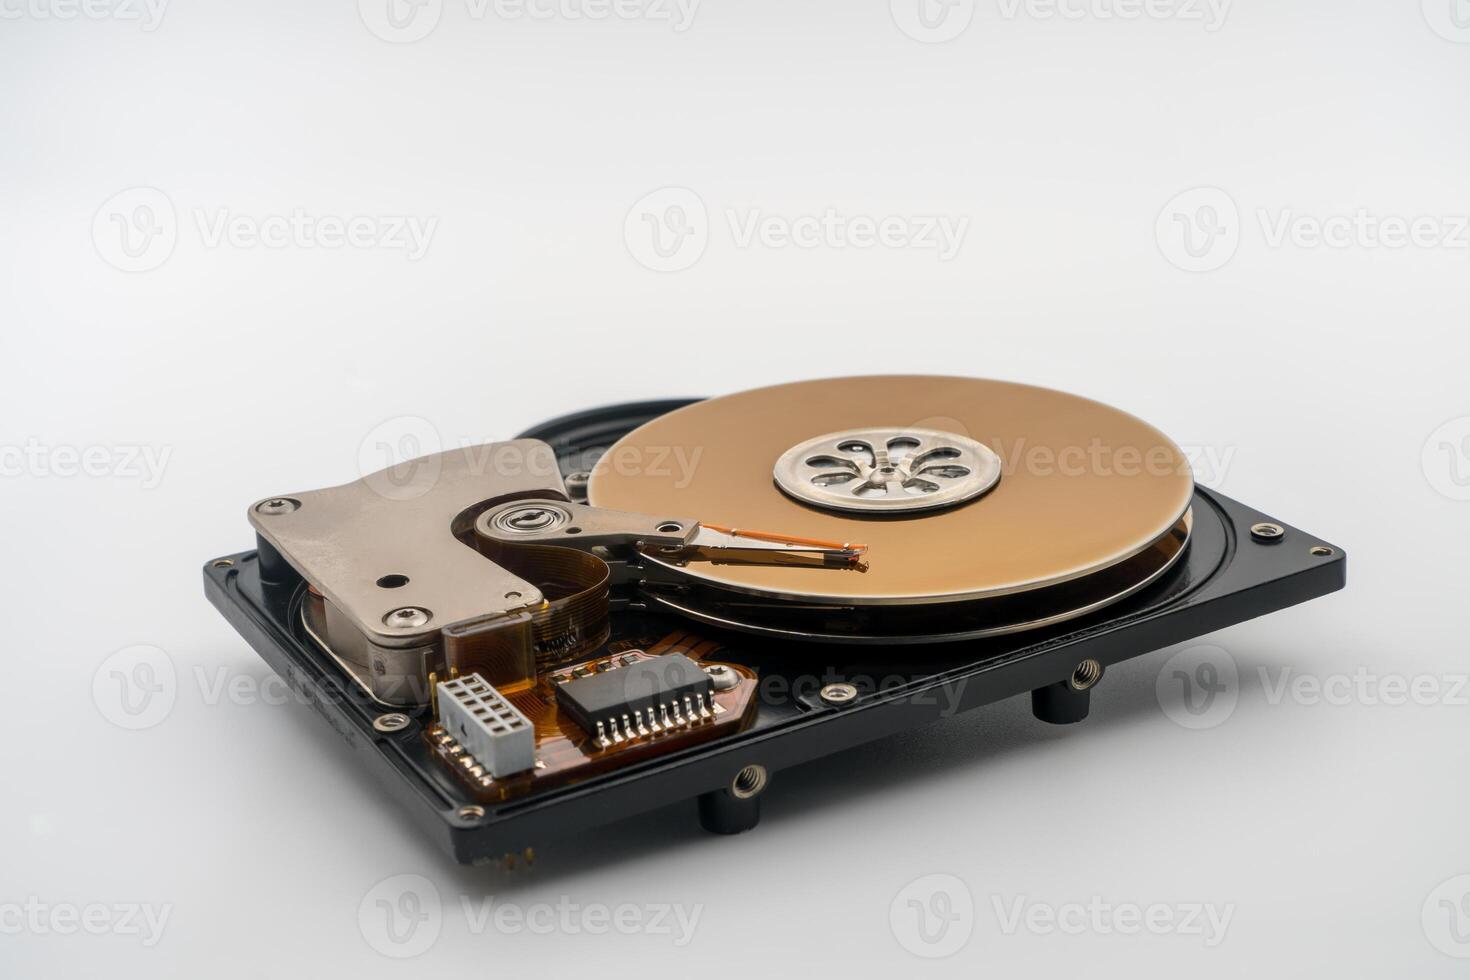 HDD, Hard disk drive, platters, circular magnetic disk. Actuator arm with read write head. Central spindle. Circuit board. Mechanical and electronic components. Precision device for data storage. photo